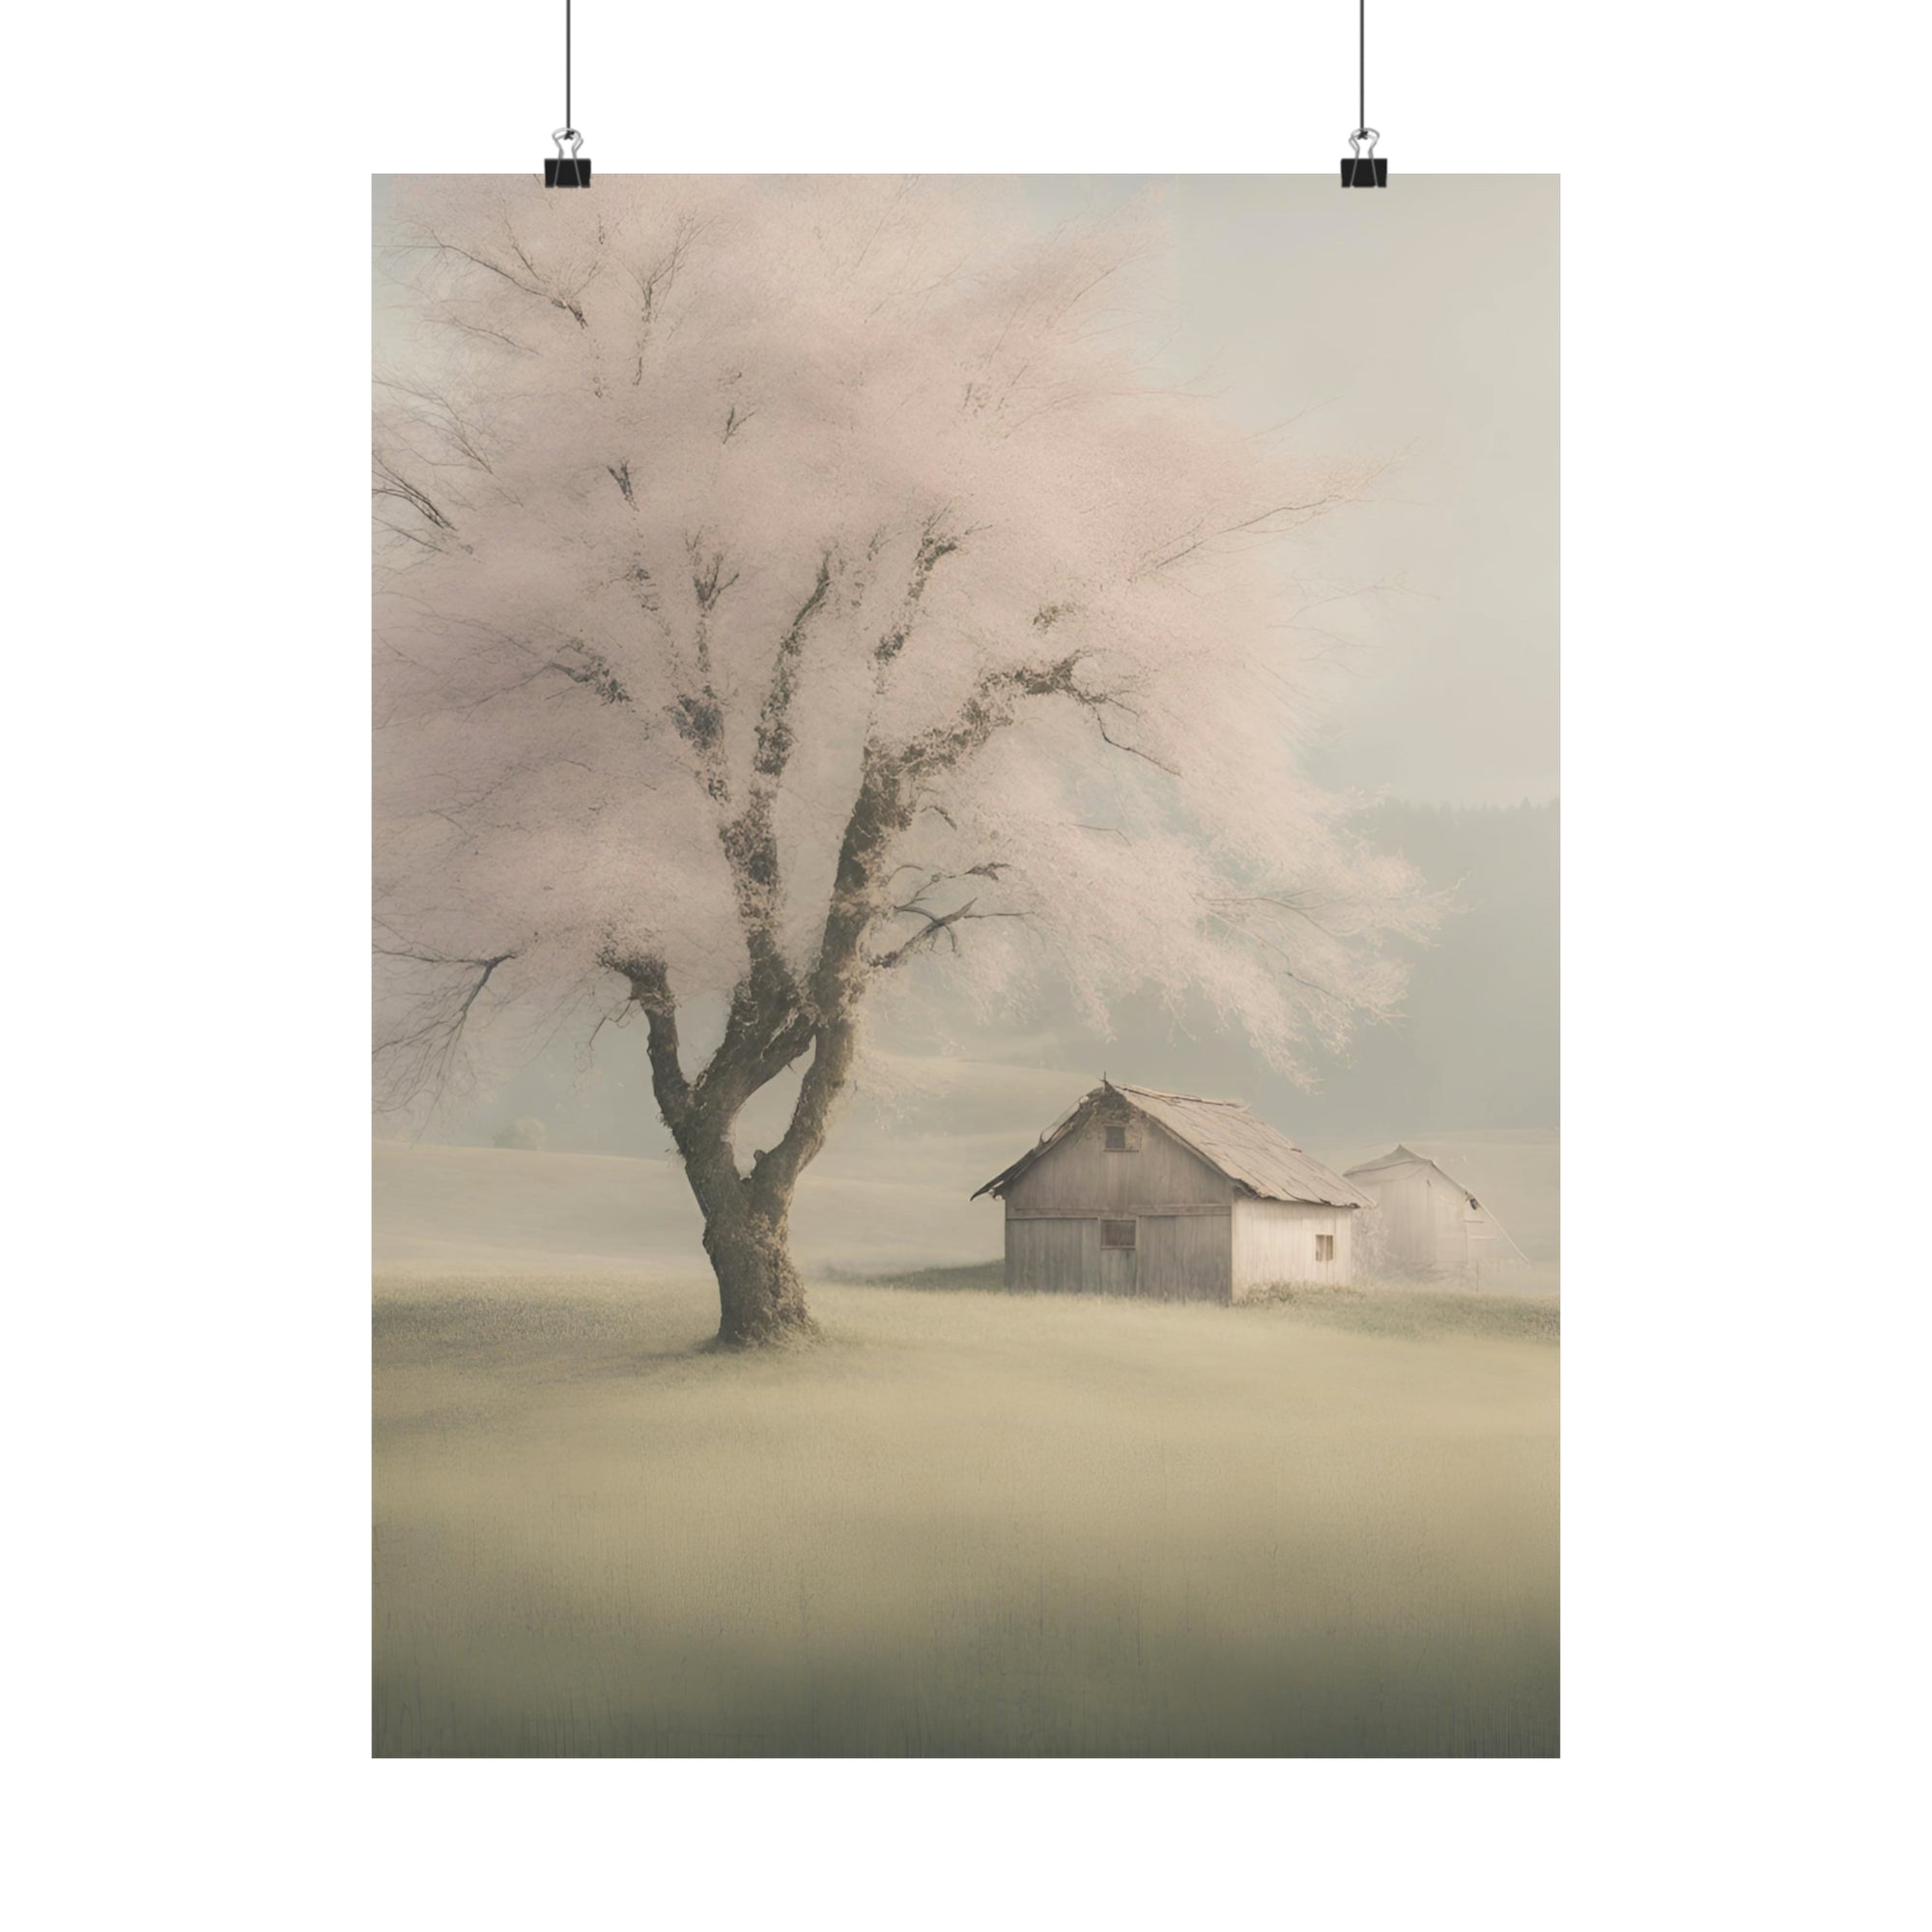 Moody Mysterious Series - Rural Scene 3 - Matte Vertical Abstract Art Posters